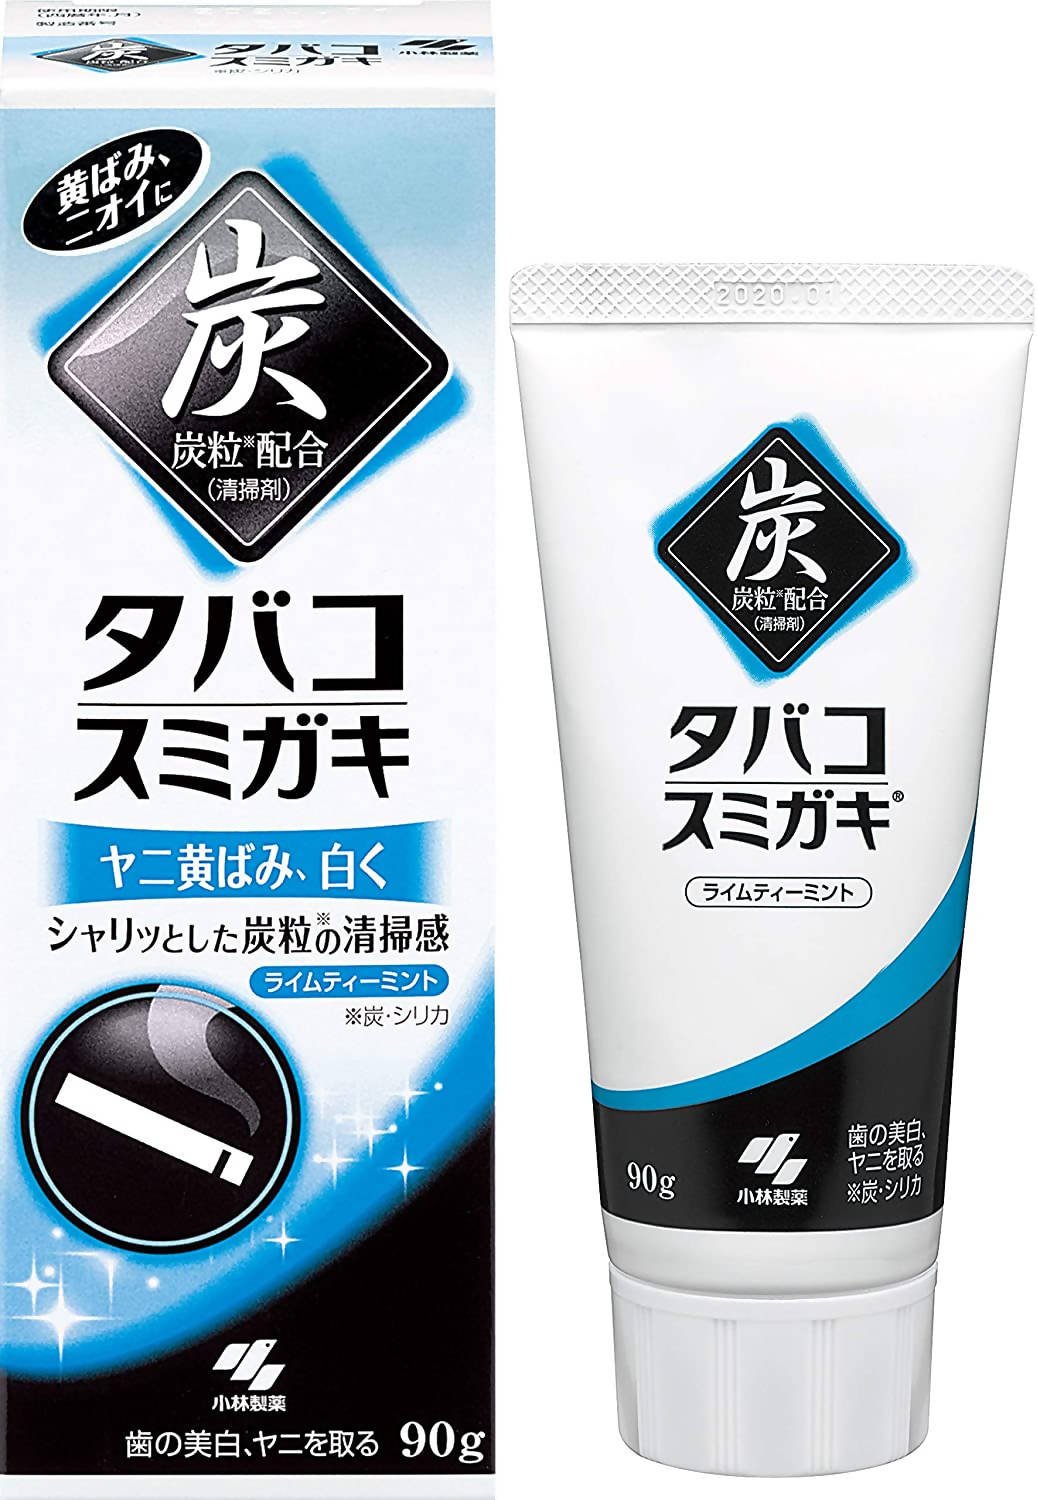 SUMIGAKI Charcoal Toothpaste – 2 Tubes Value Pack – 100g x 2